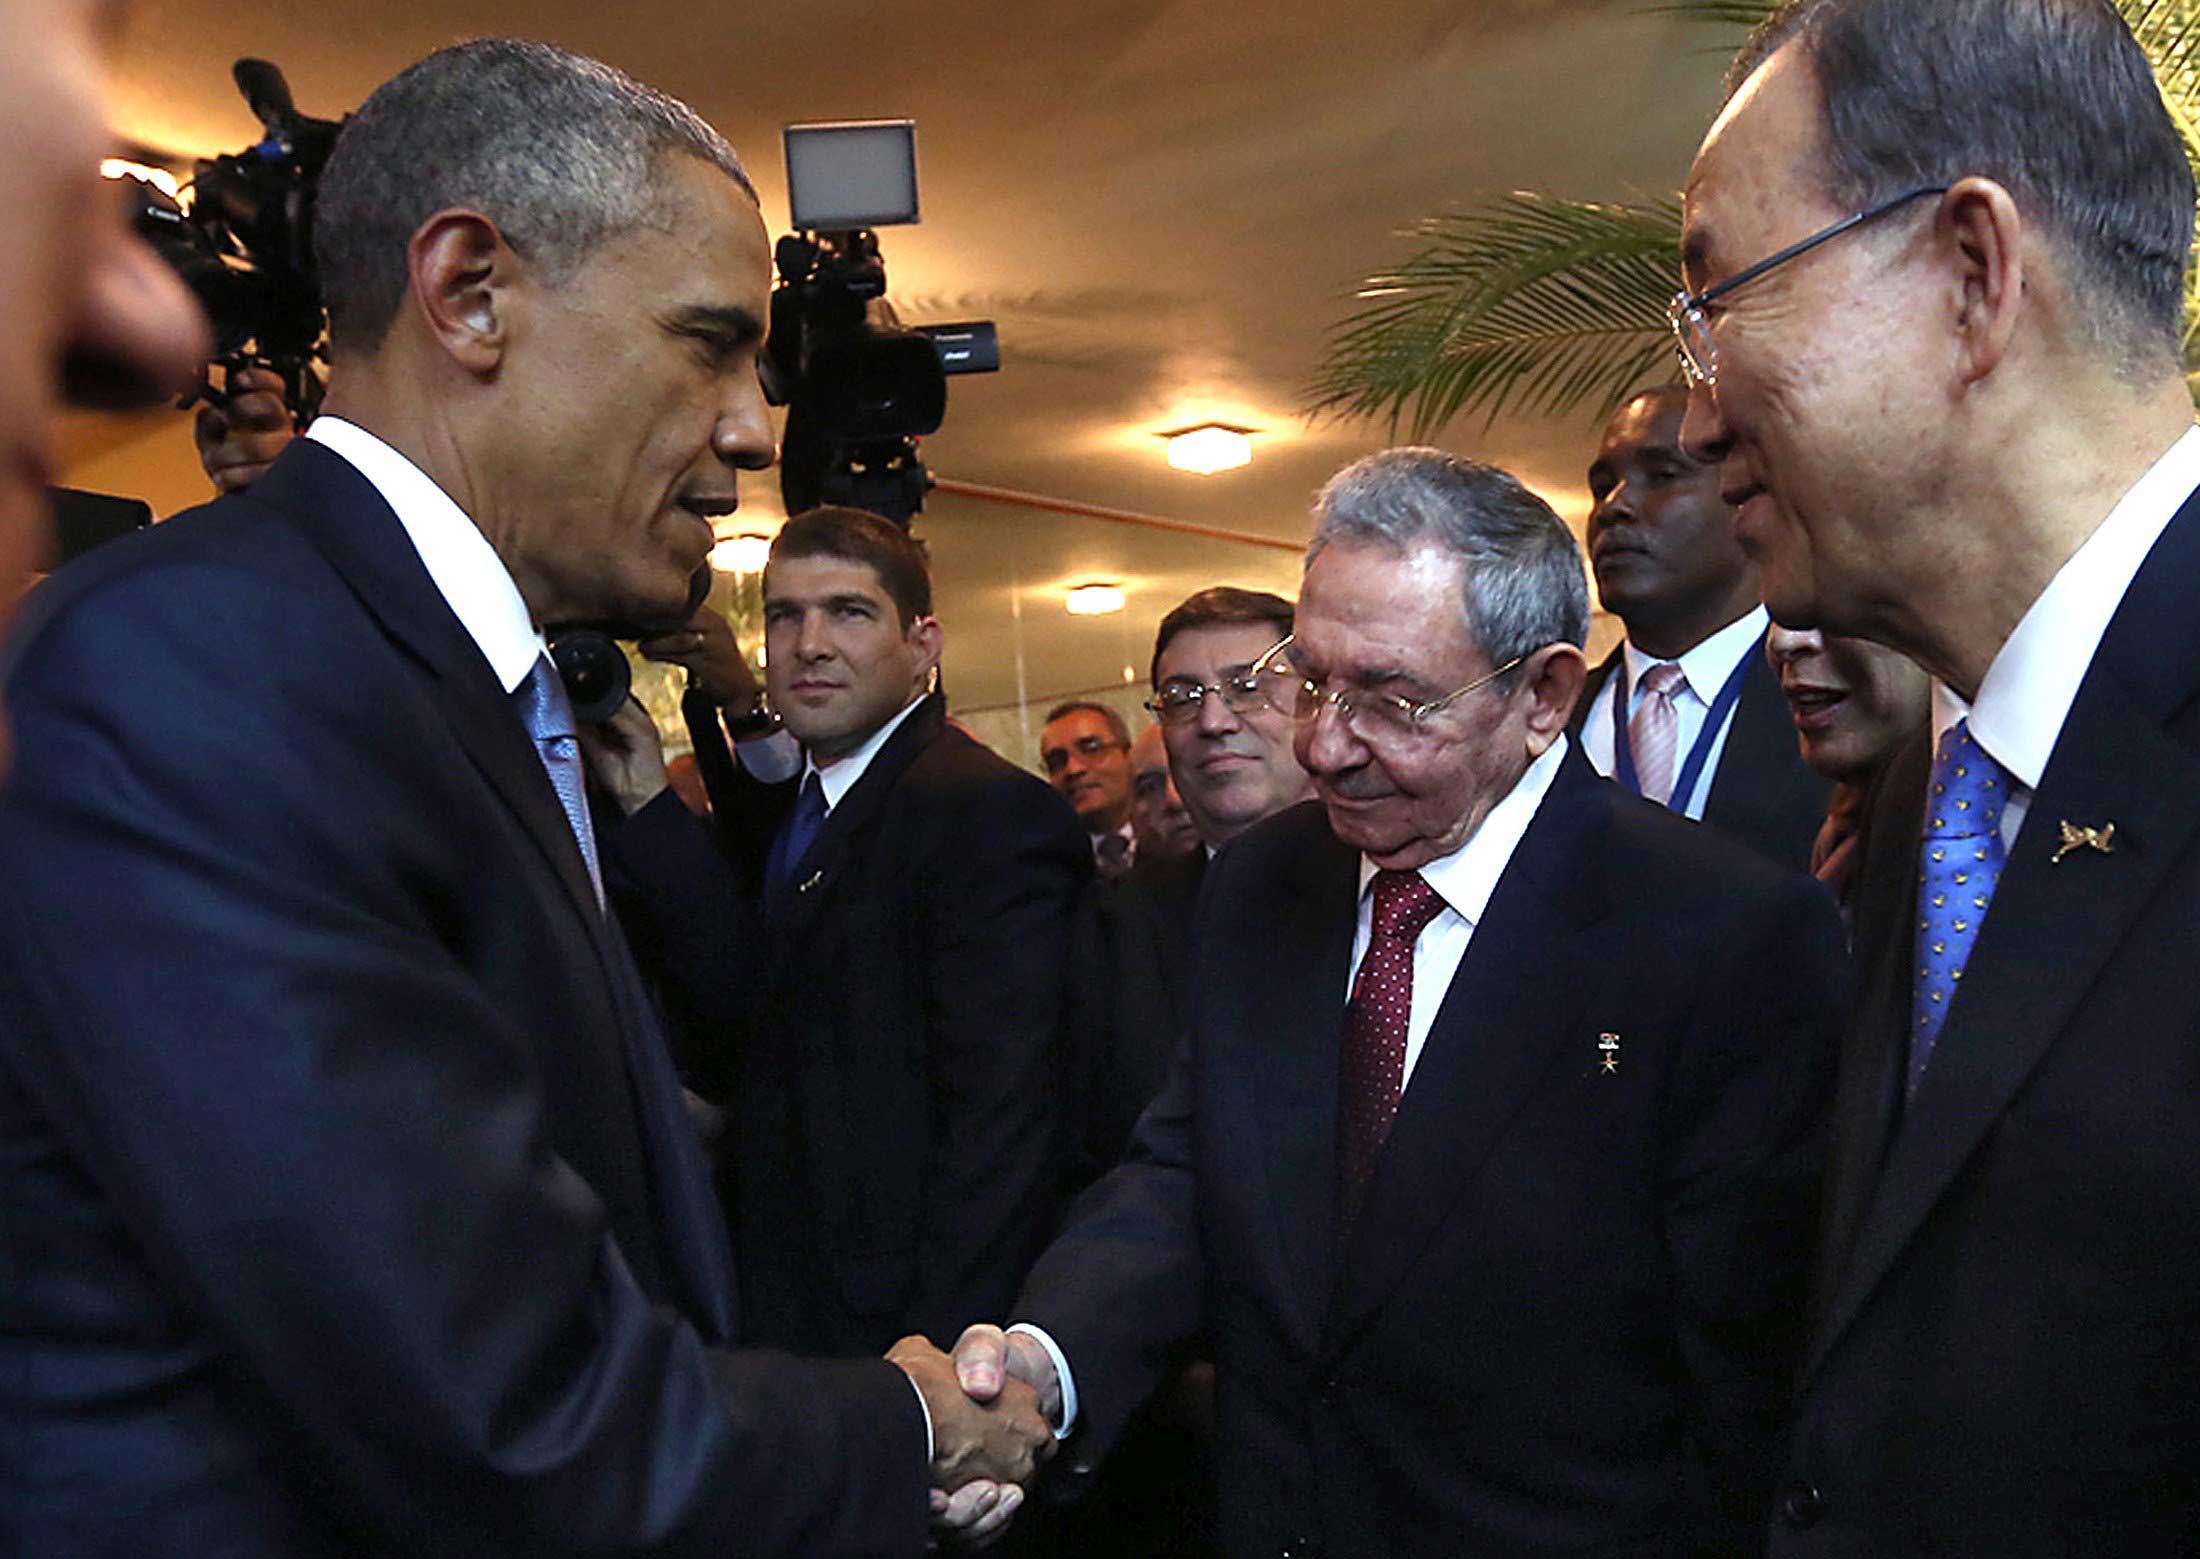 Cuban President Raul Castro (2-R) and US President Barack Obama (L) shaking hands as Castro's grandson and bodyguard Raul Rodriguez Castro (2-L), Cuban Foreign Minister Bruno Rodriguez (C) and United Nations chief Ban Ki-moon (R) look on, moments before the opening ceremony of the VII Americas Summit, in Panama City on April 10, 2015.